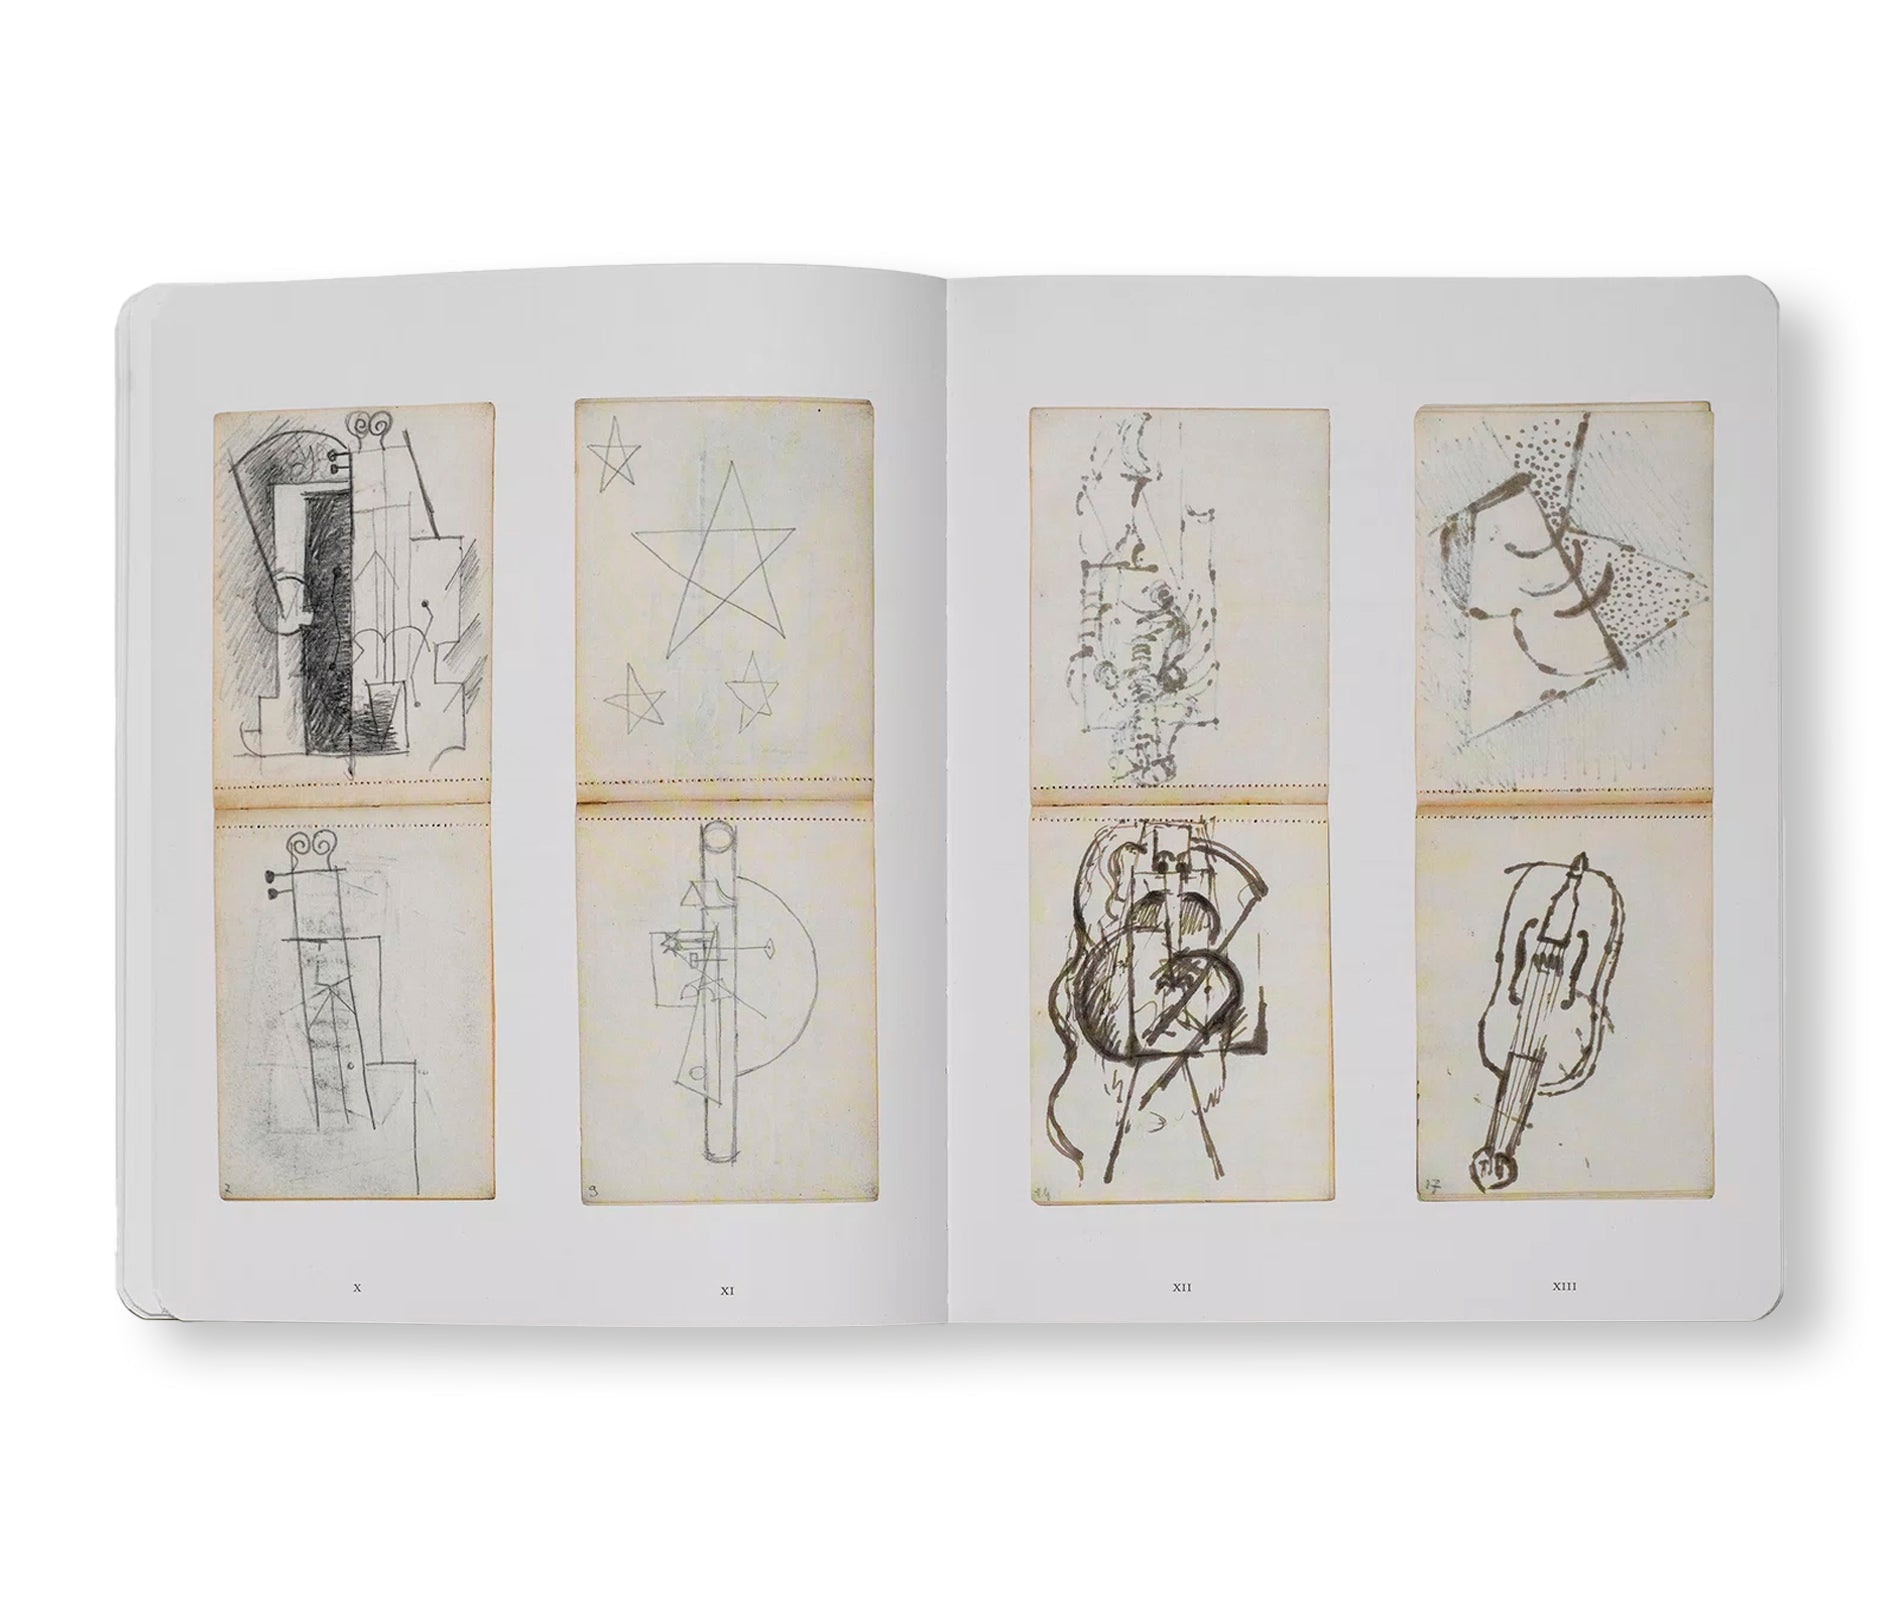 PICASSO: 14 SKETCHBOOKS by Pablo Picasso